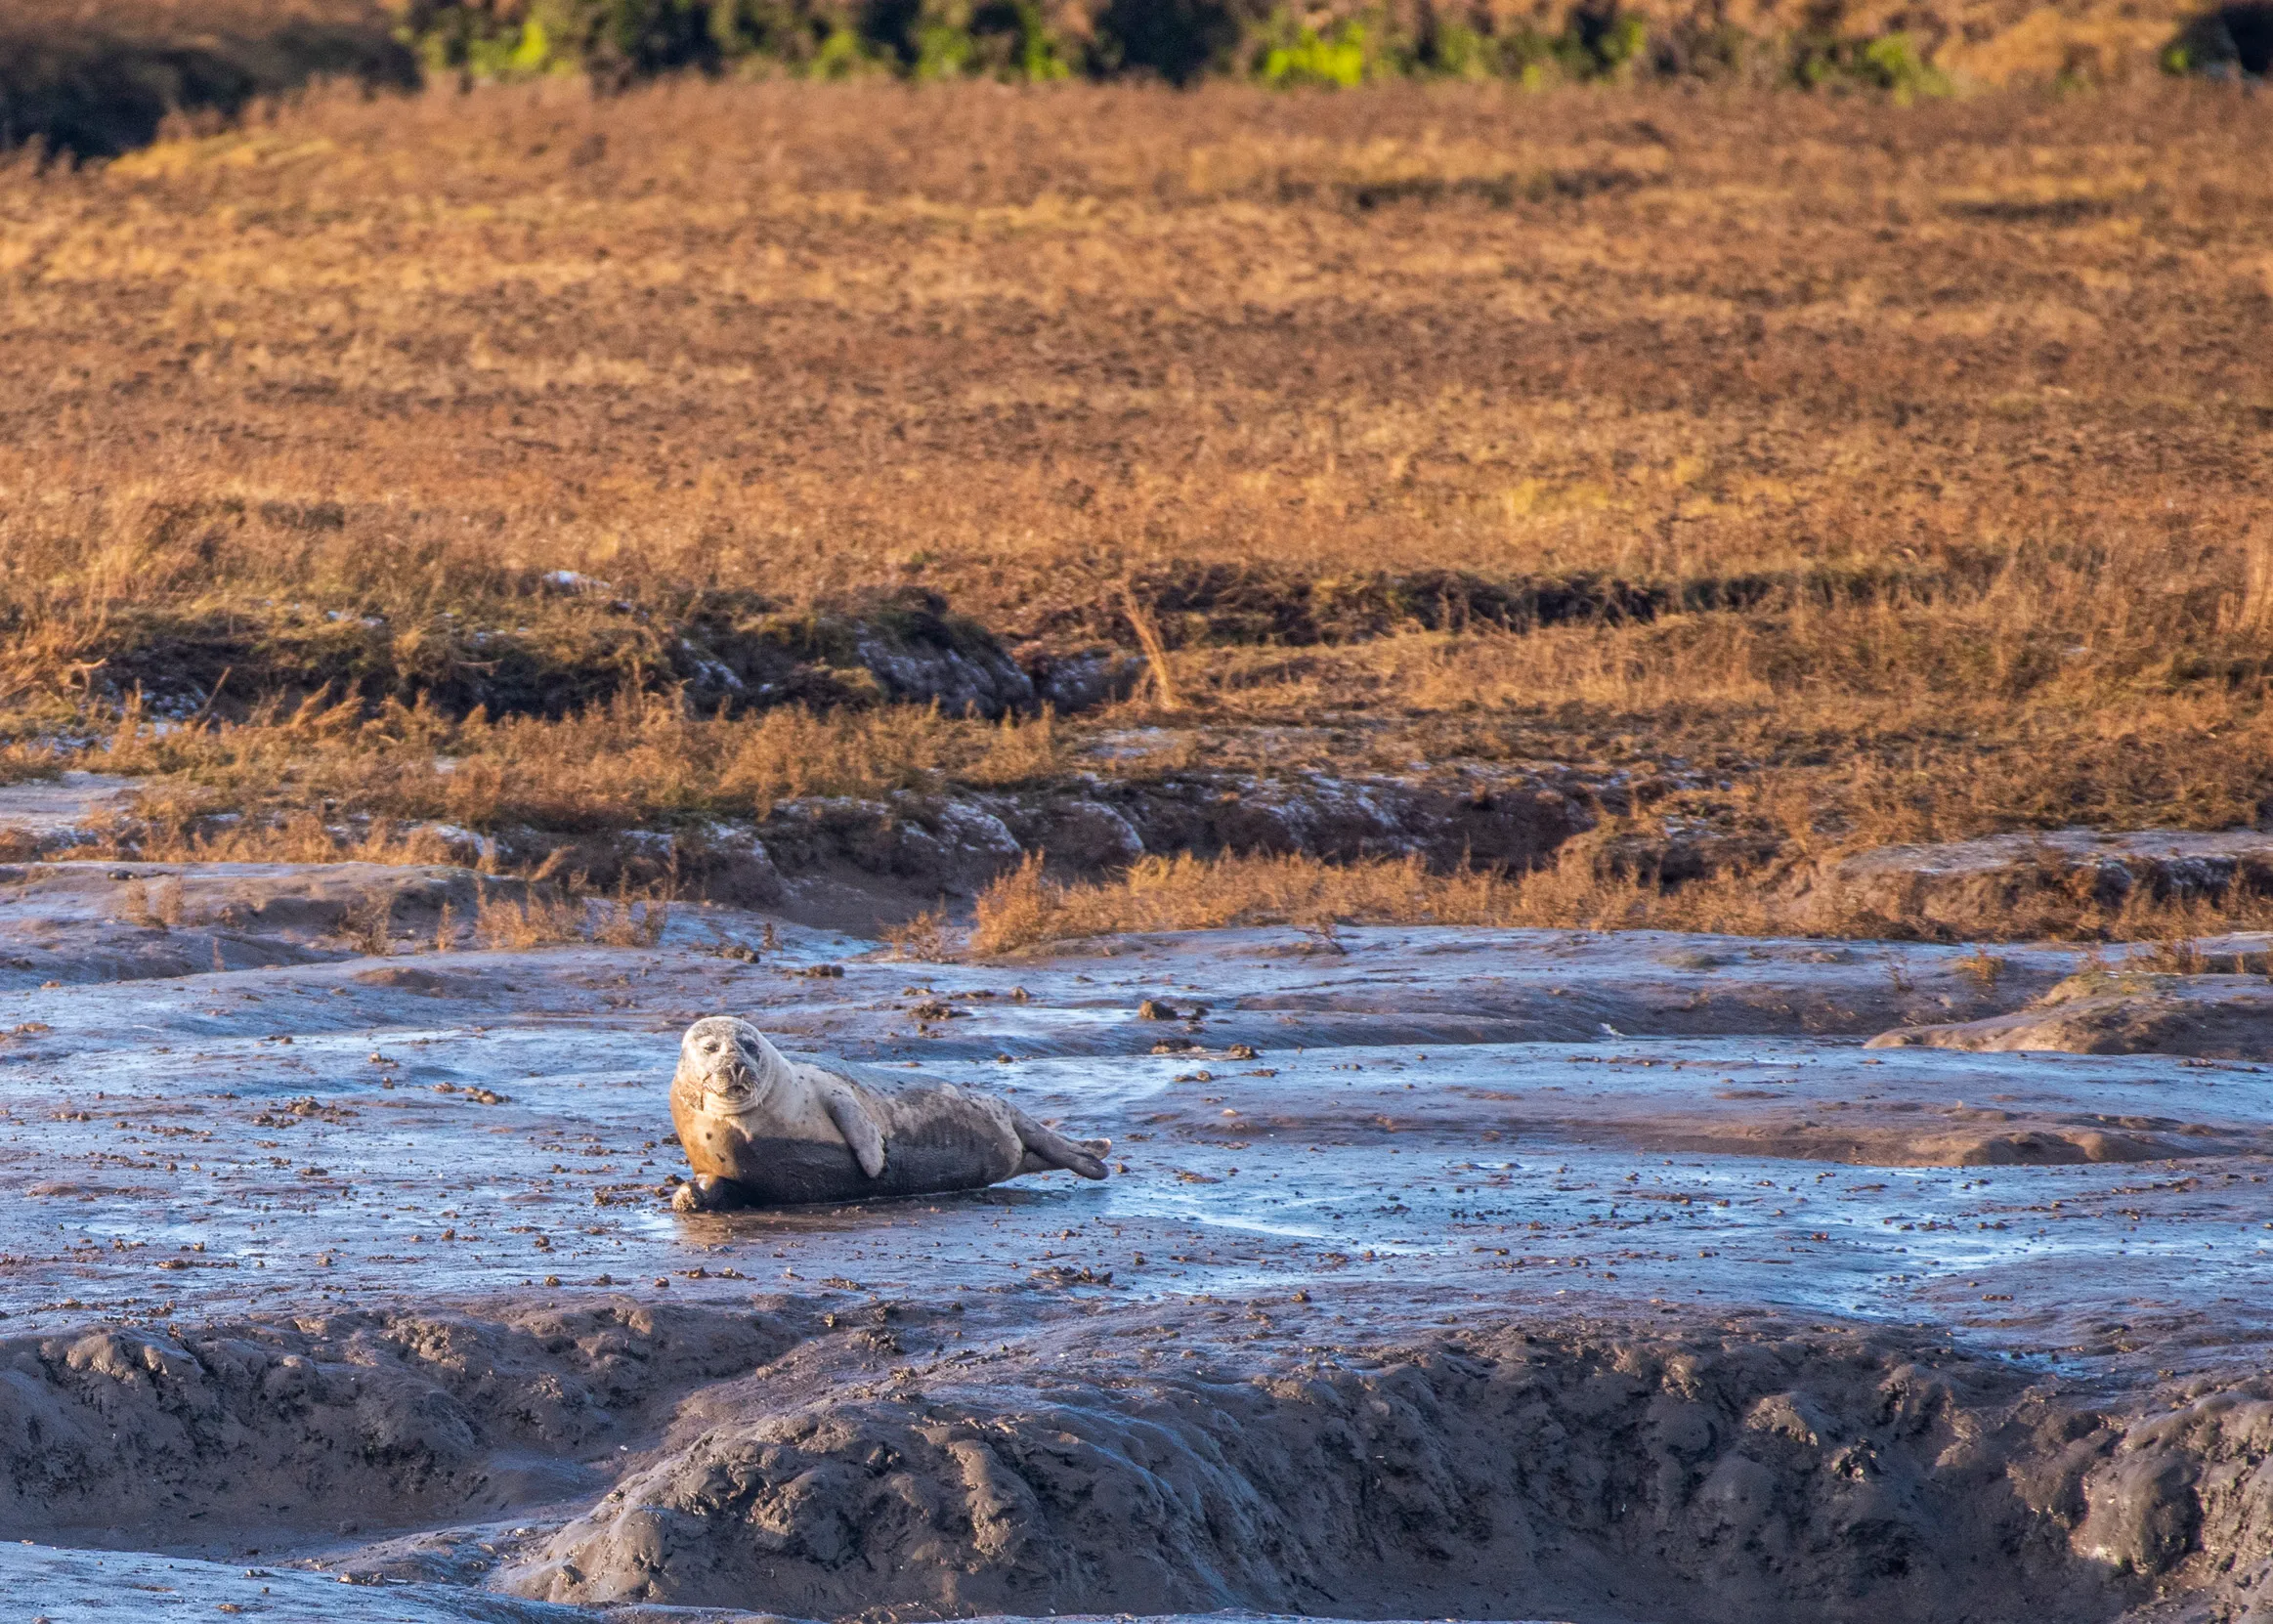 A Common Seal, resting on the muddy shore at Saltholme reserve in winter